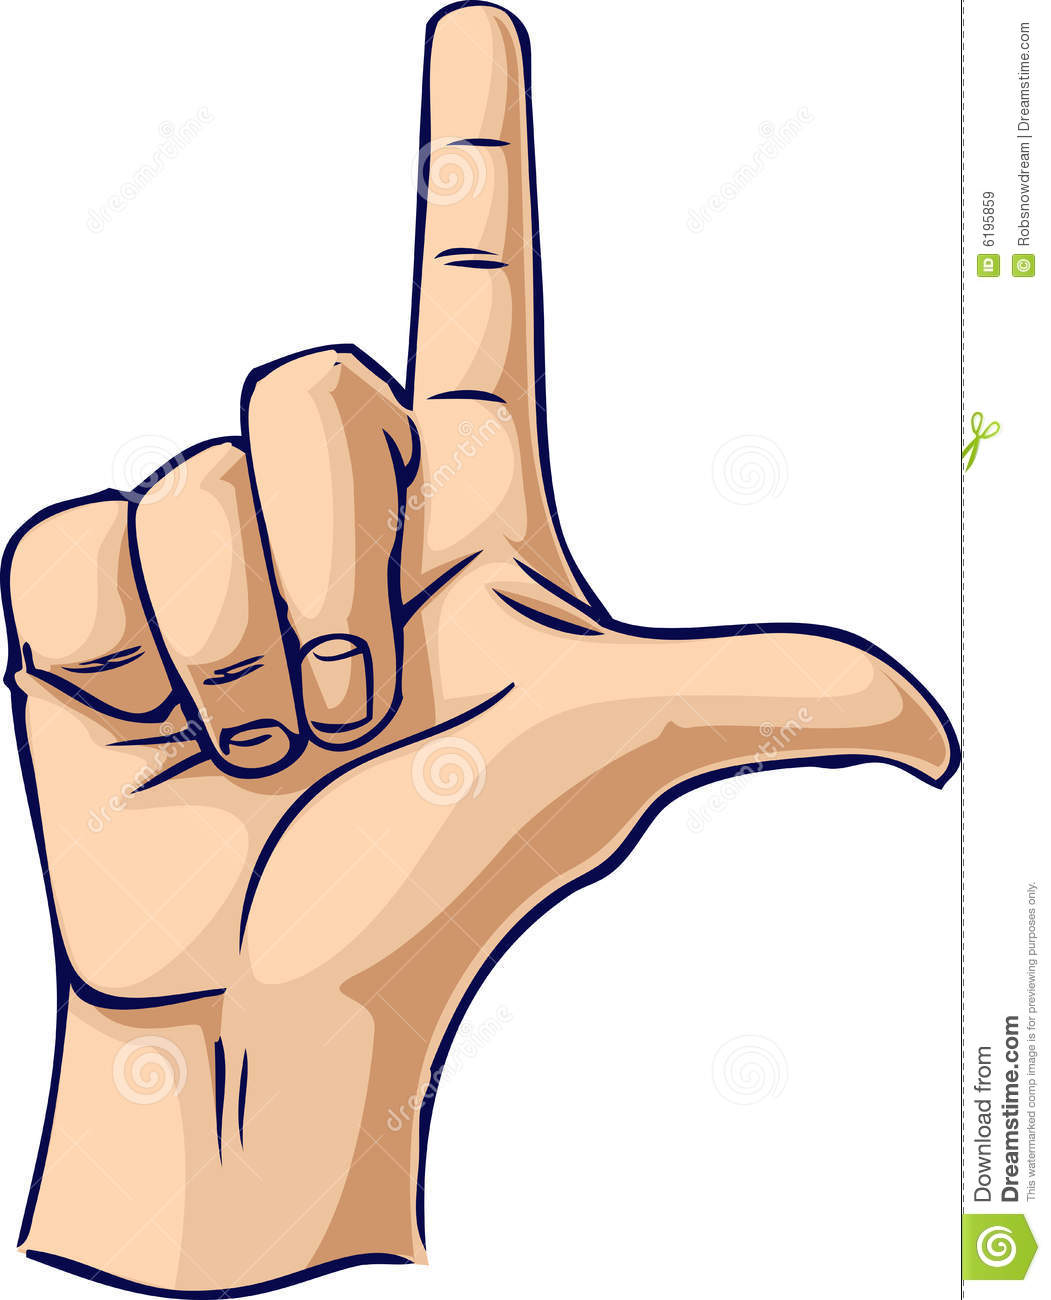 Looser Hand Gesture Royalty Free Stock Images   Image  6195859